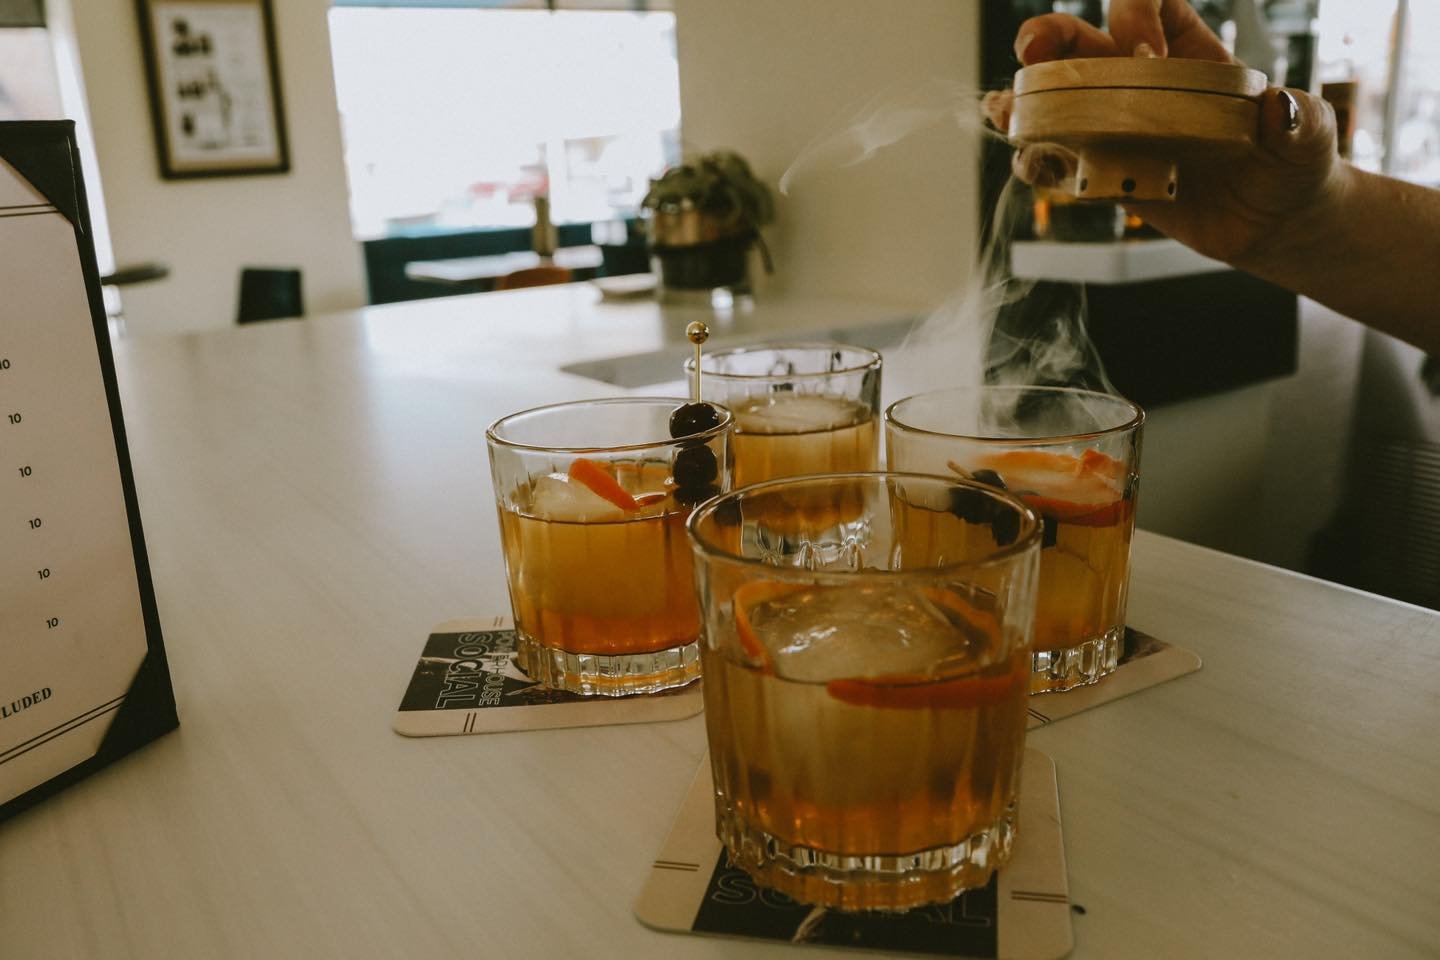 Join us tonight for Roaring Wednesday&rsquo;s at Powerhouse Social! 🥃 Dive into the night with our signature smoked &quot;Old Fashioned&quot; cocktail lineup. Let&rsquo;s make this Wednesday unforgettable. 🎉 #RoaringWednesdays #PowerhouseSocial #NE